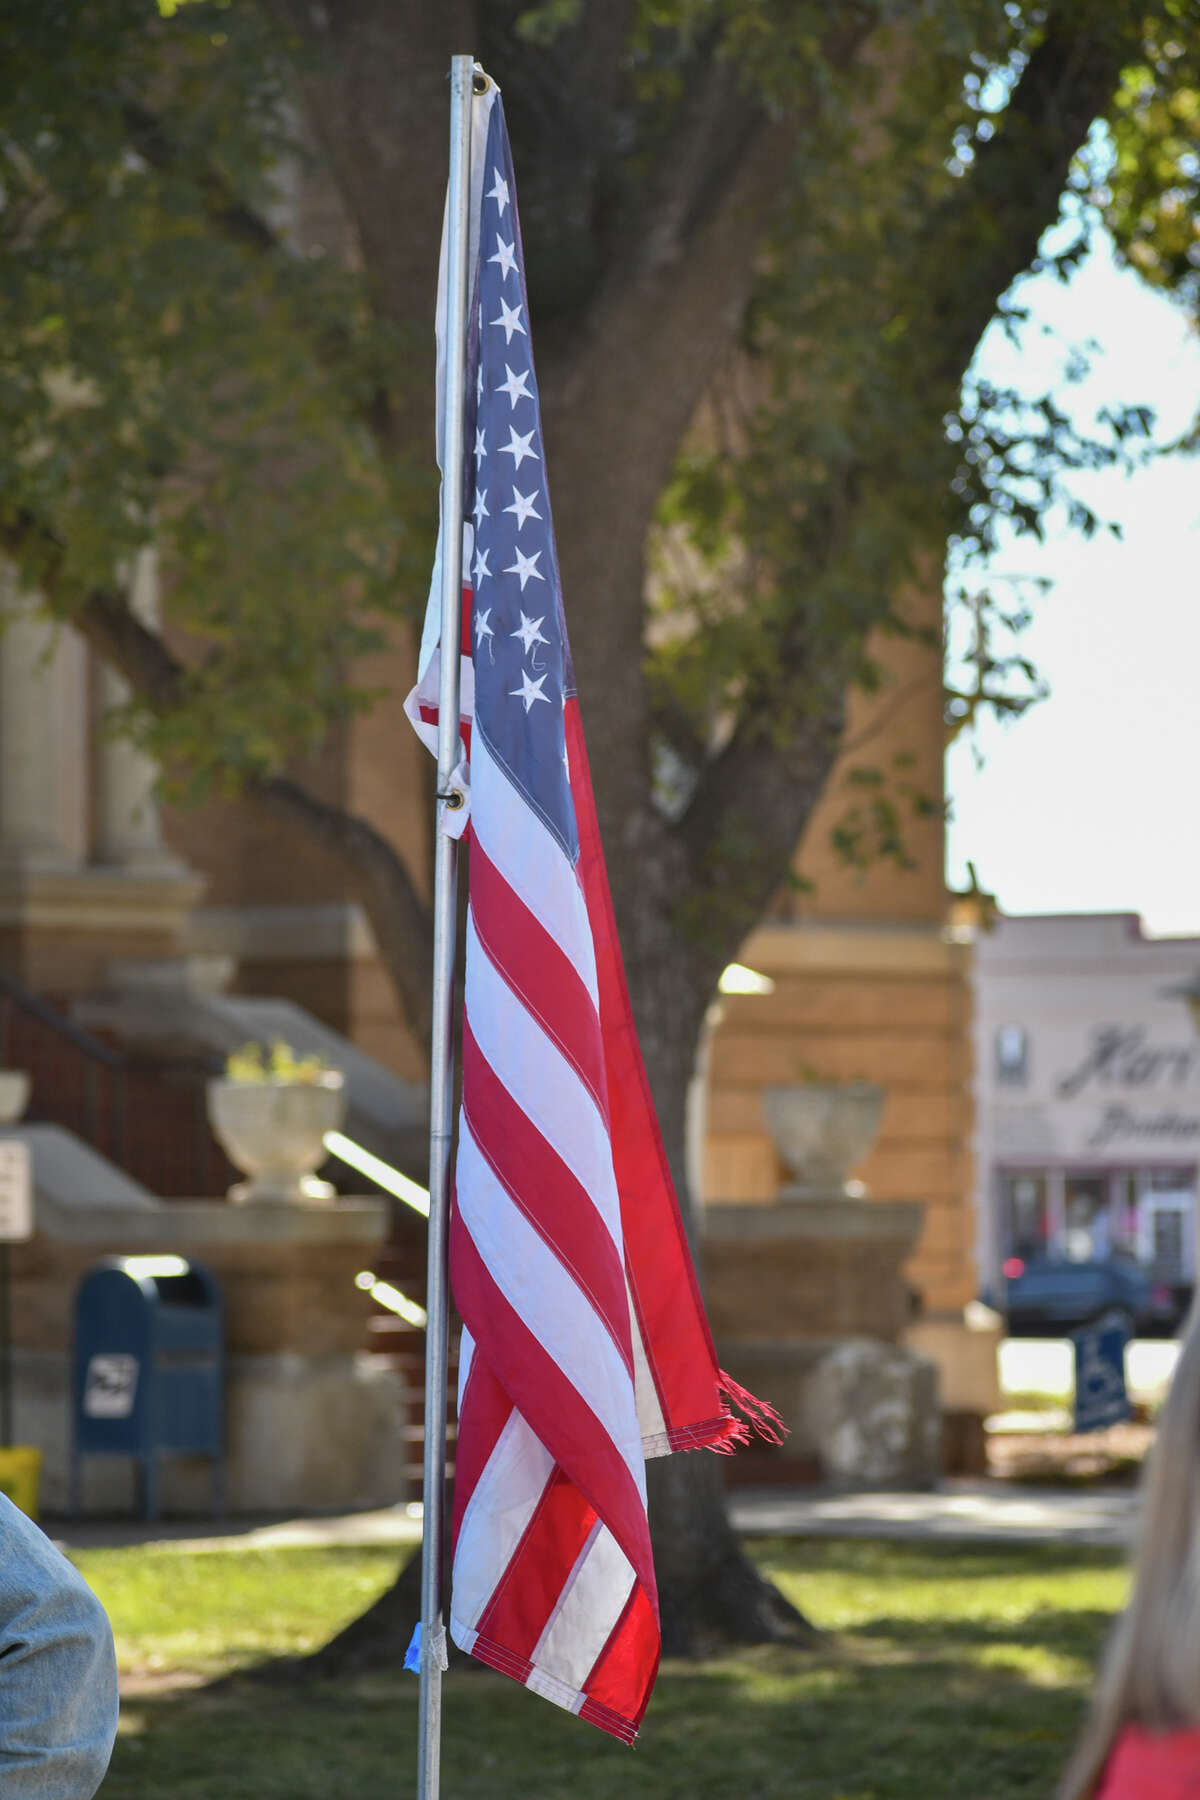 About two dozen citizens gathered for a Veteran’s Day ceremony at the veteran’s memorial in front of the Hale County Courthouse on Thursday morning. 